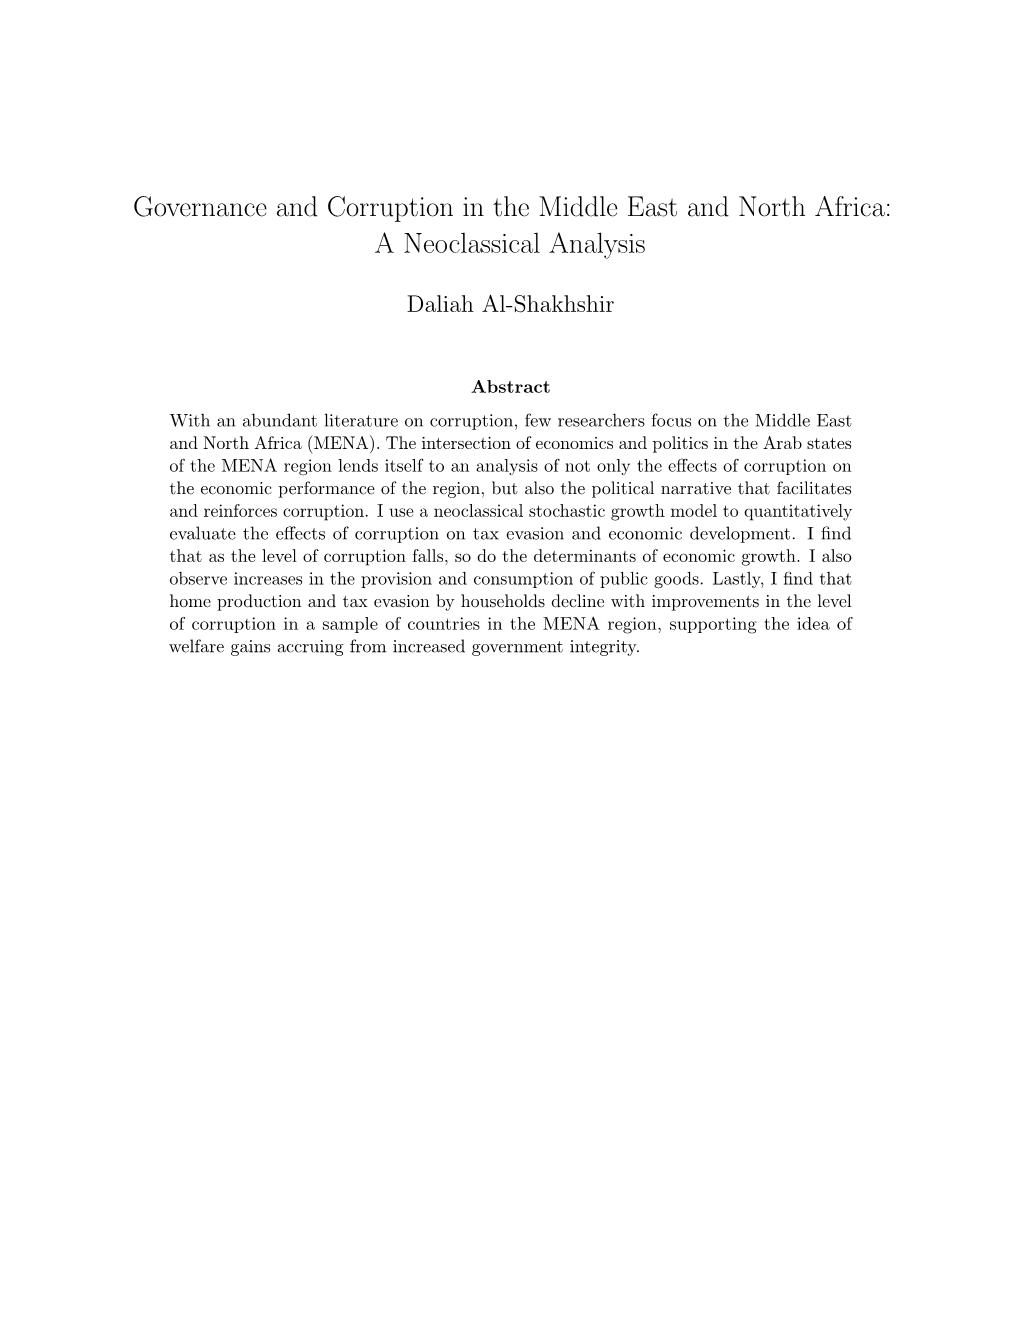 Governance and Corruption in the Middle East and North Africa: a Neoclassical Analysis